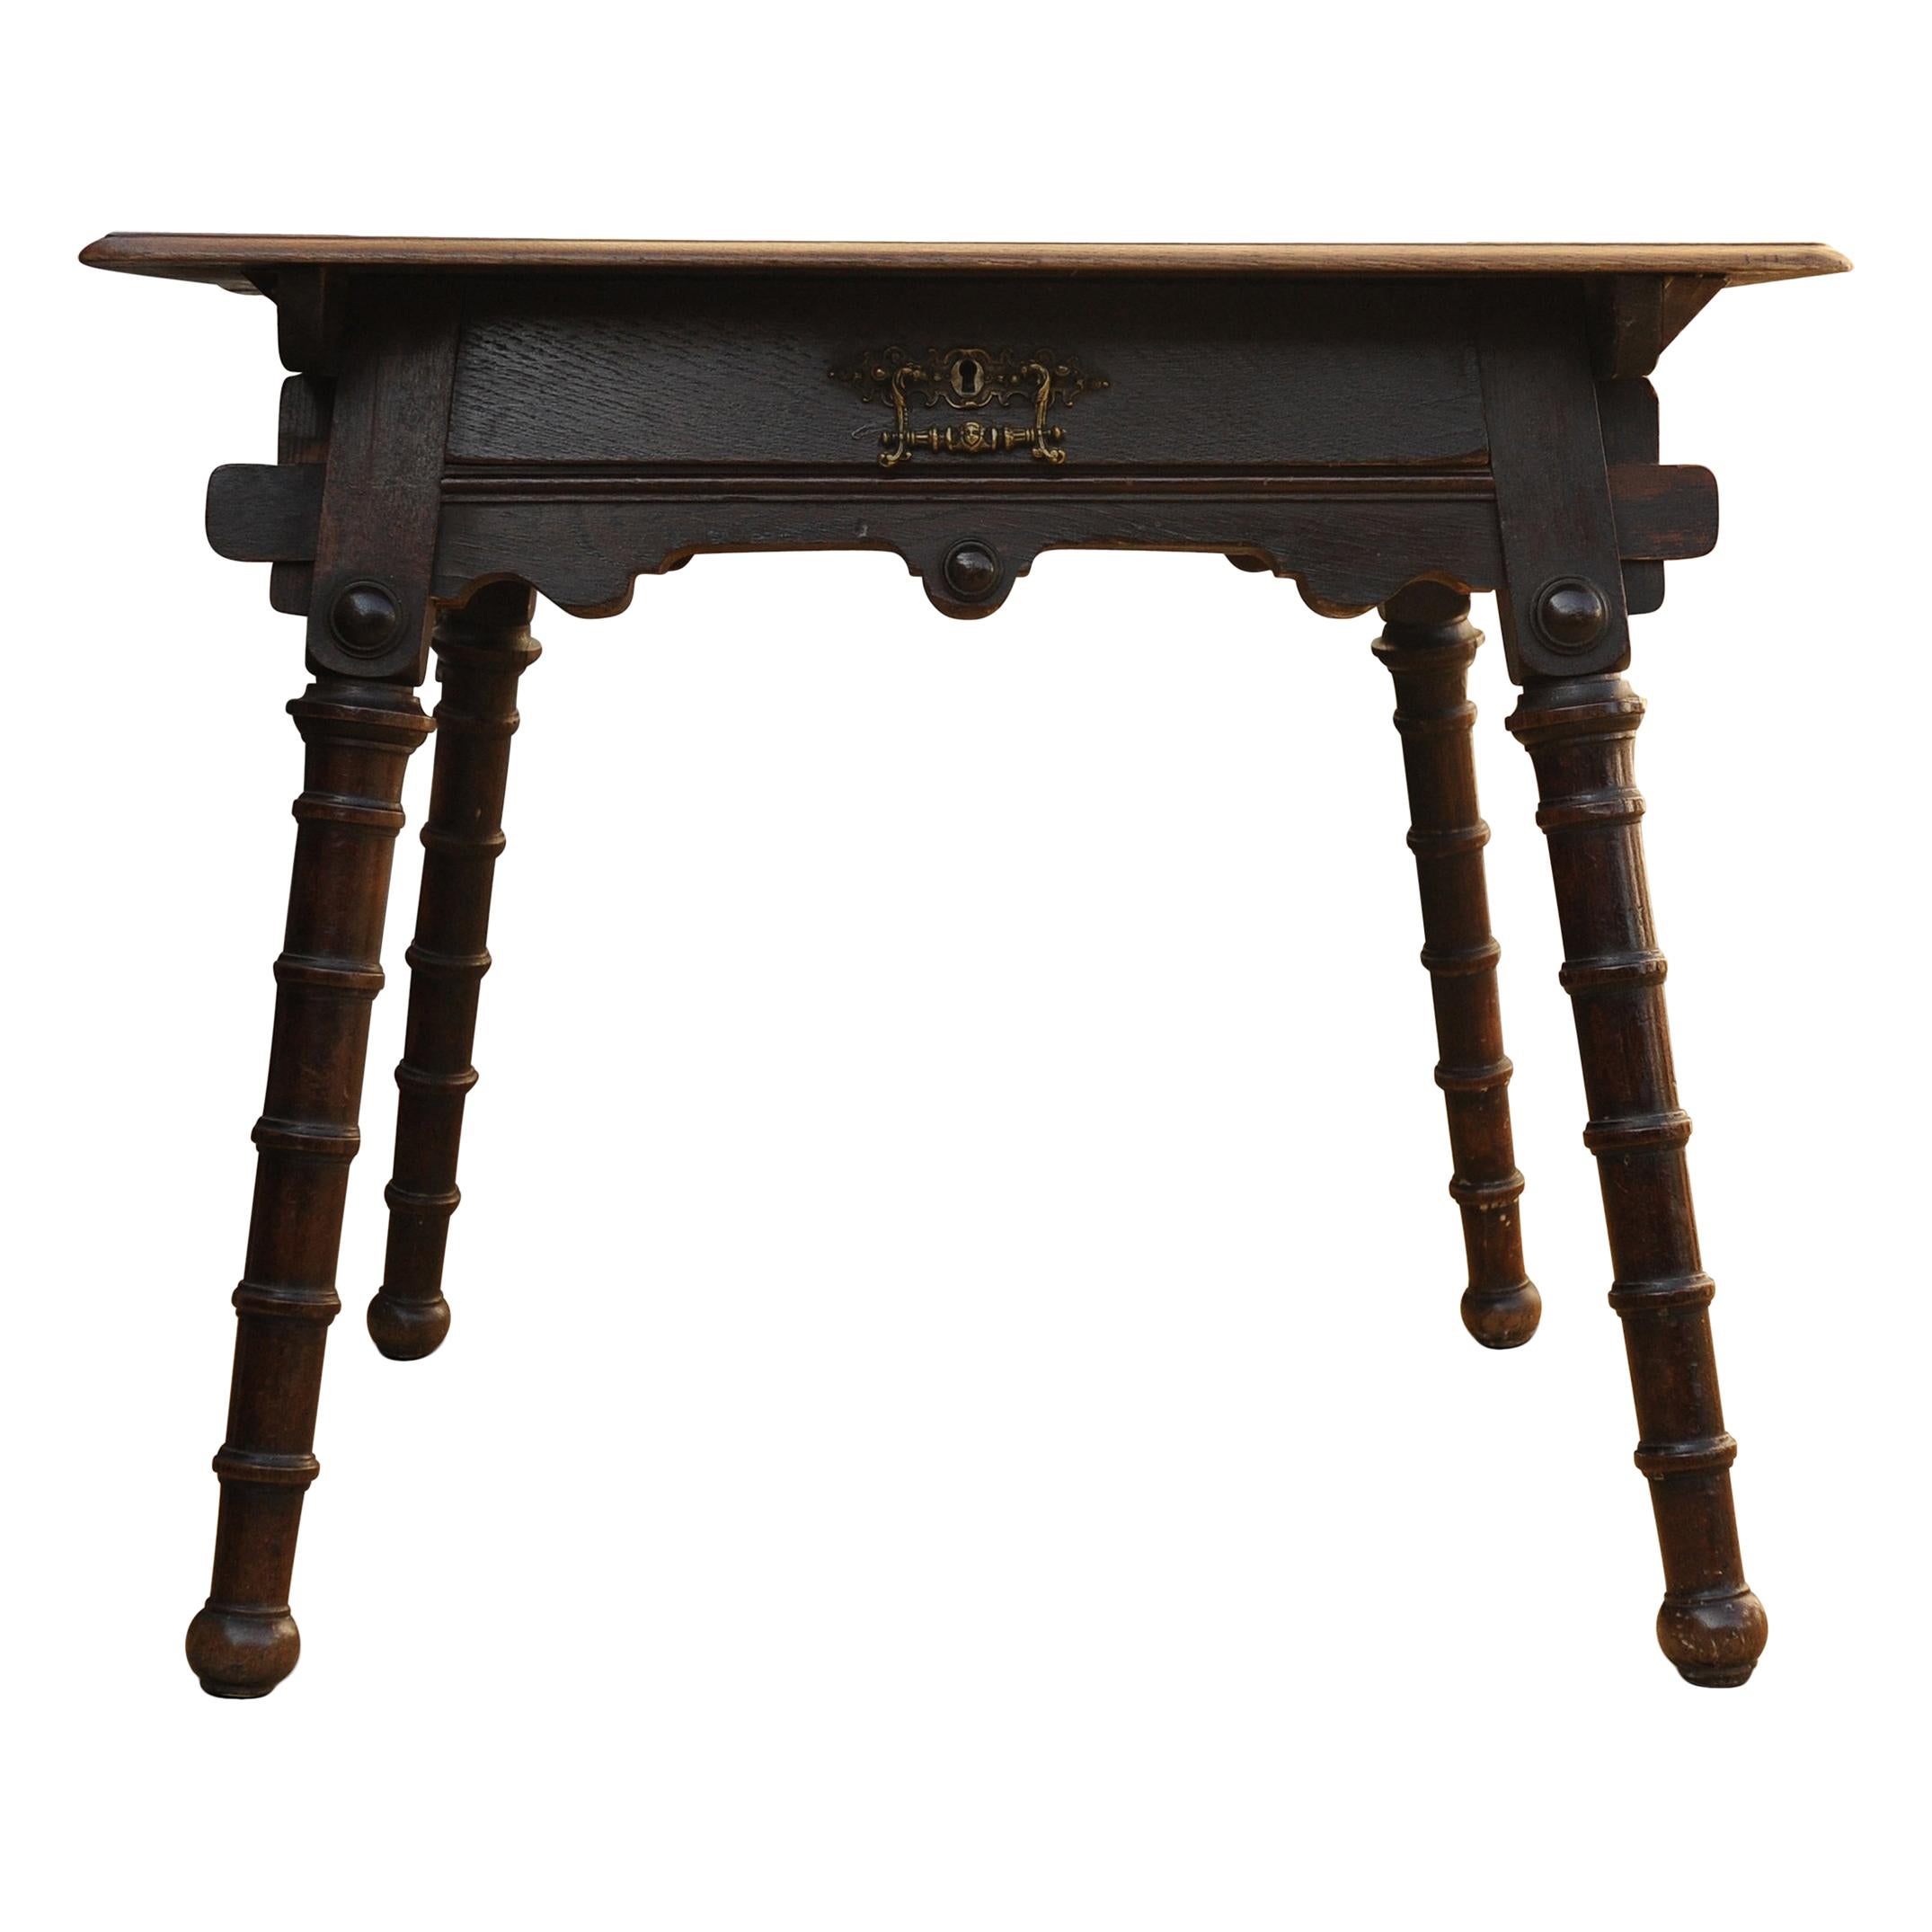 Liberty's William Morris Victorian Arts & Crafts Solid Oak Table For Sale